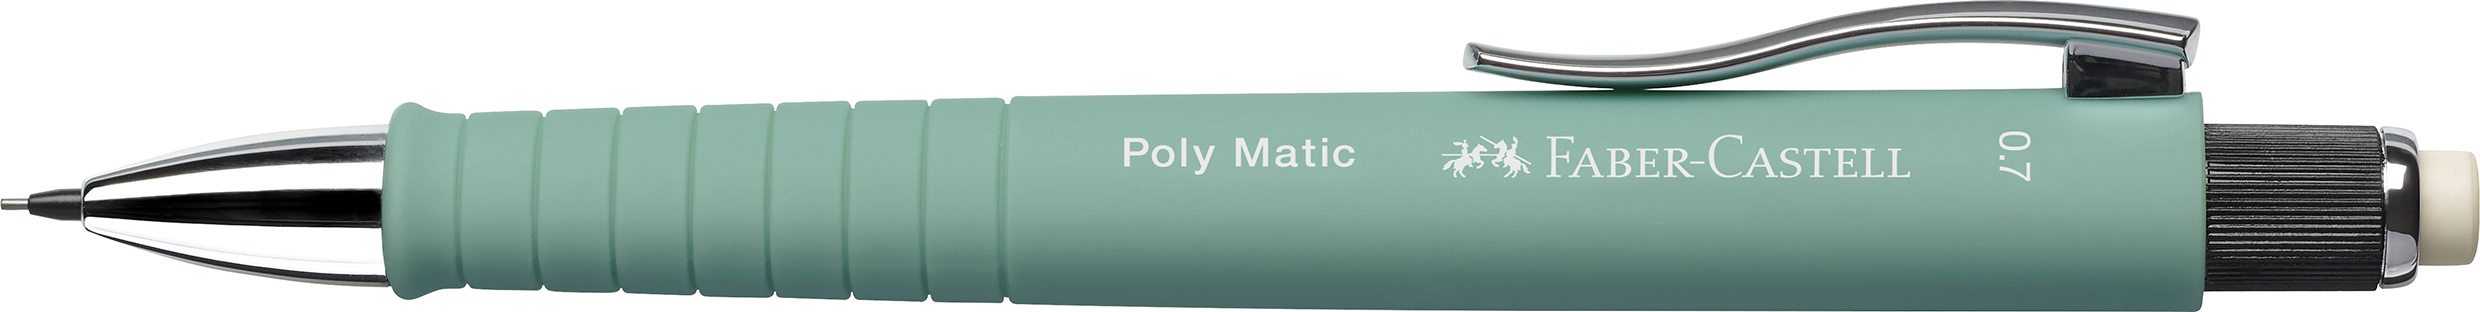 FABER-CASTELL Porte-mine Poly Matic 0.7mm 133365 mint